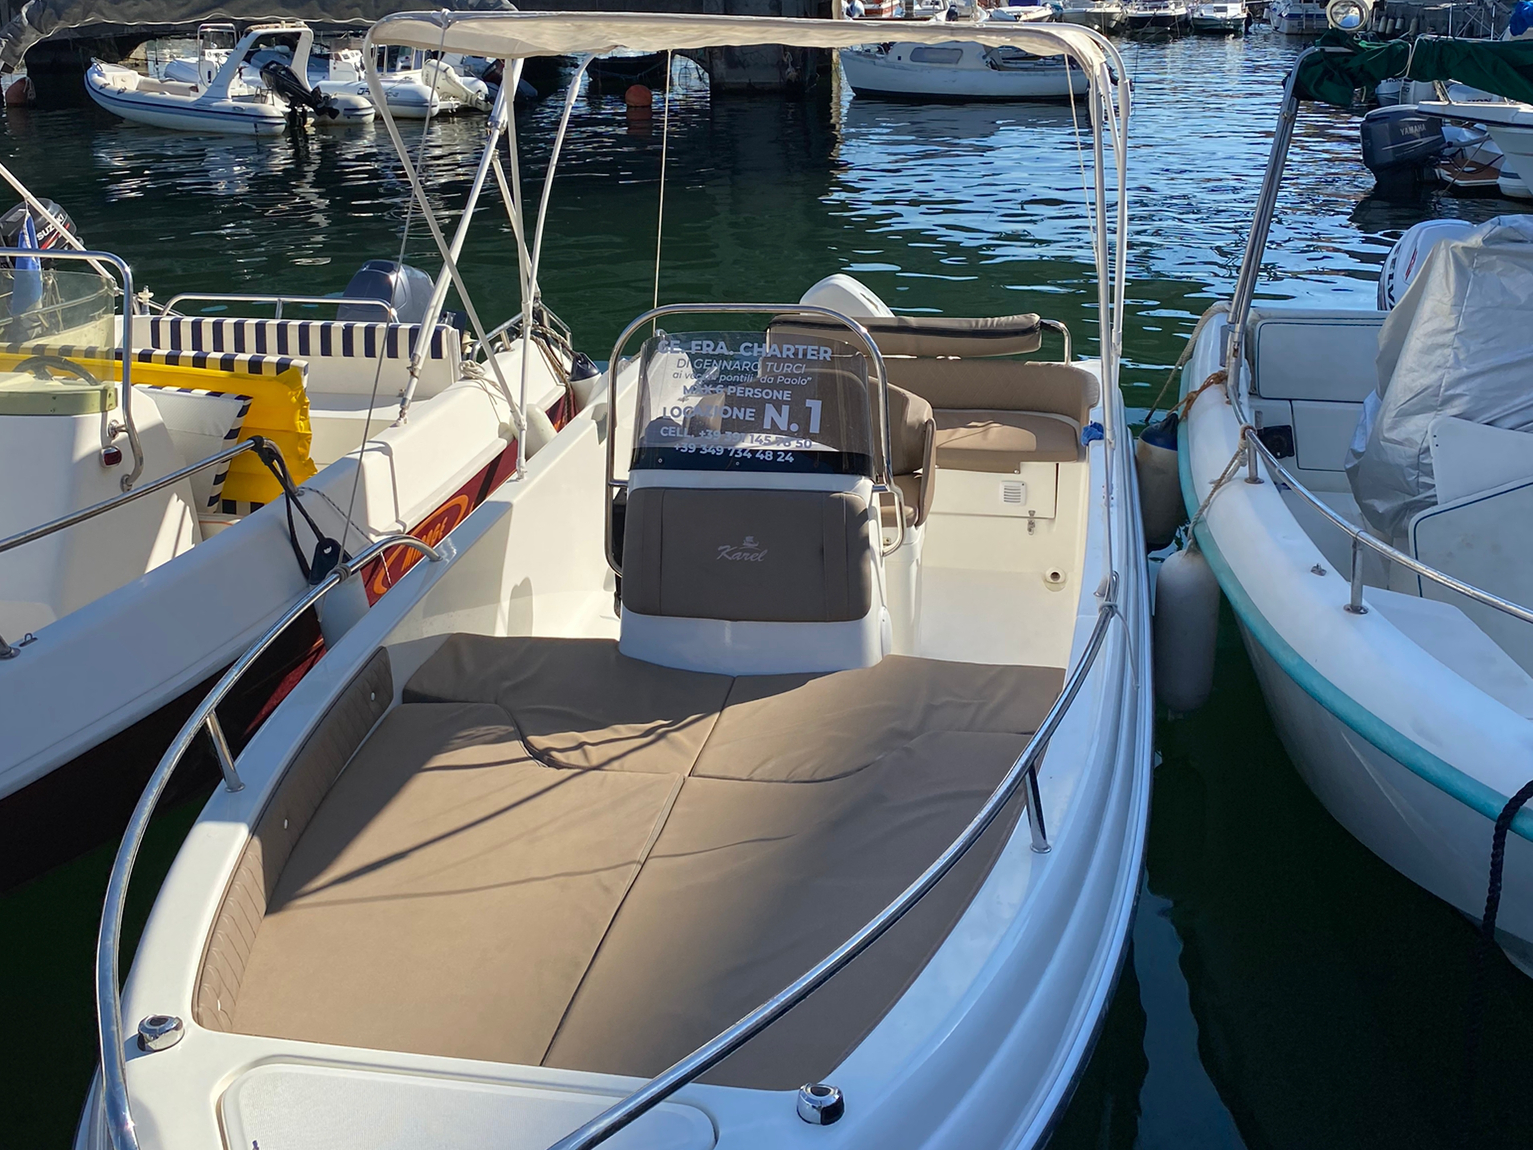 Ithaca 550 - Yacht Charter Naples & Boat hire in Italy Campania Bay of Naples Castellammare di Stabia Porto di Castellammare di Stabia 5